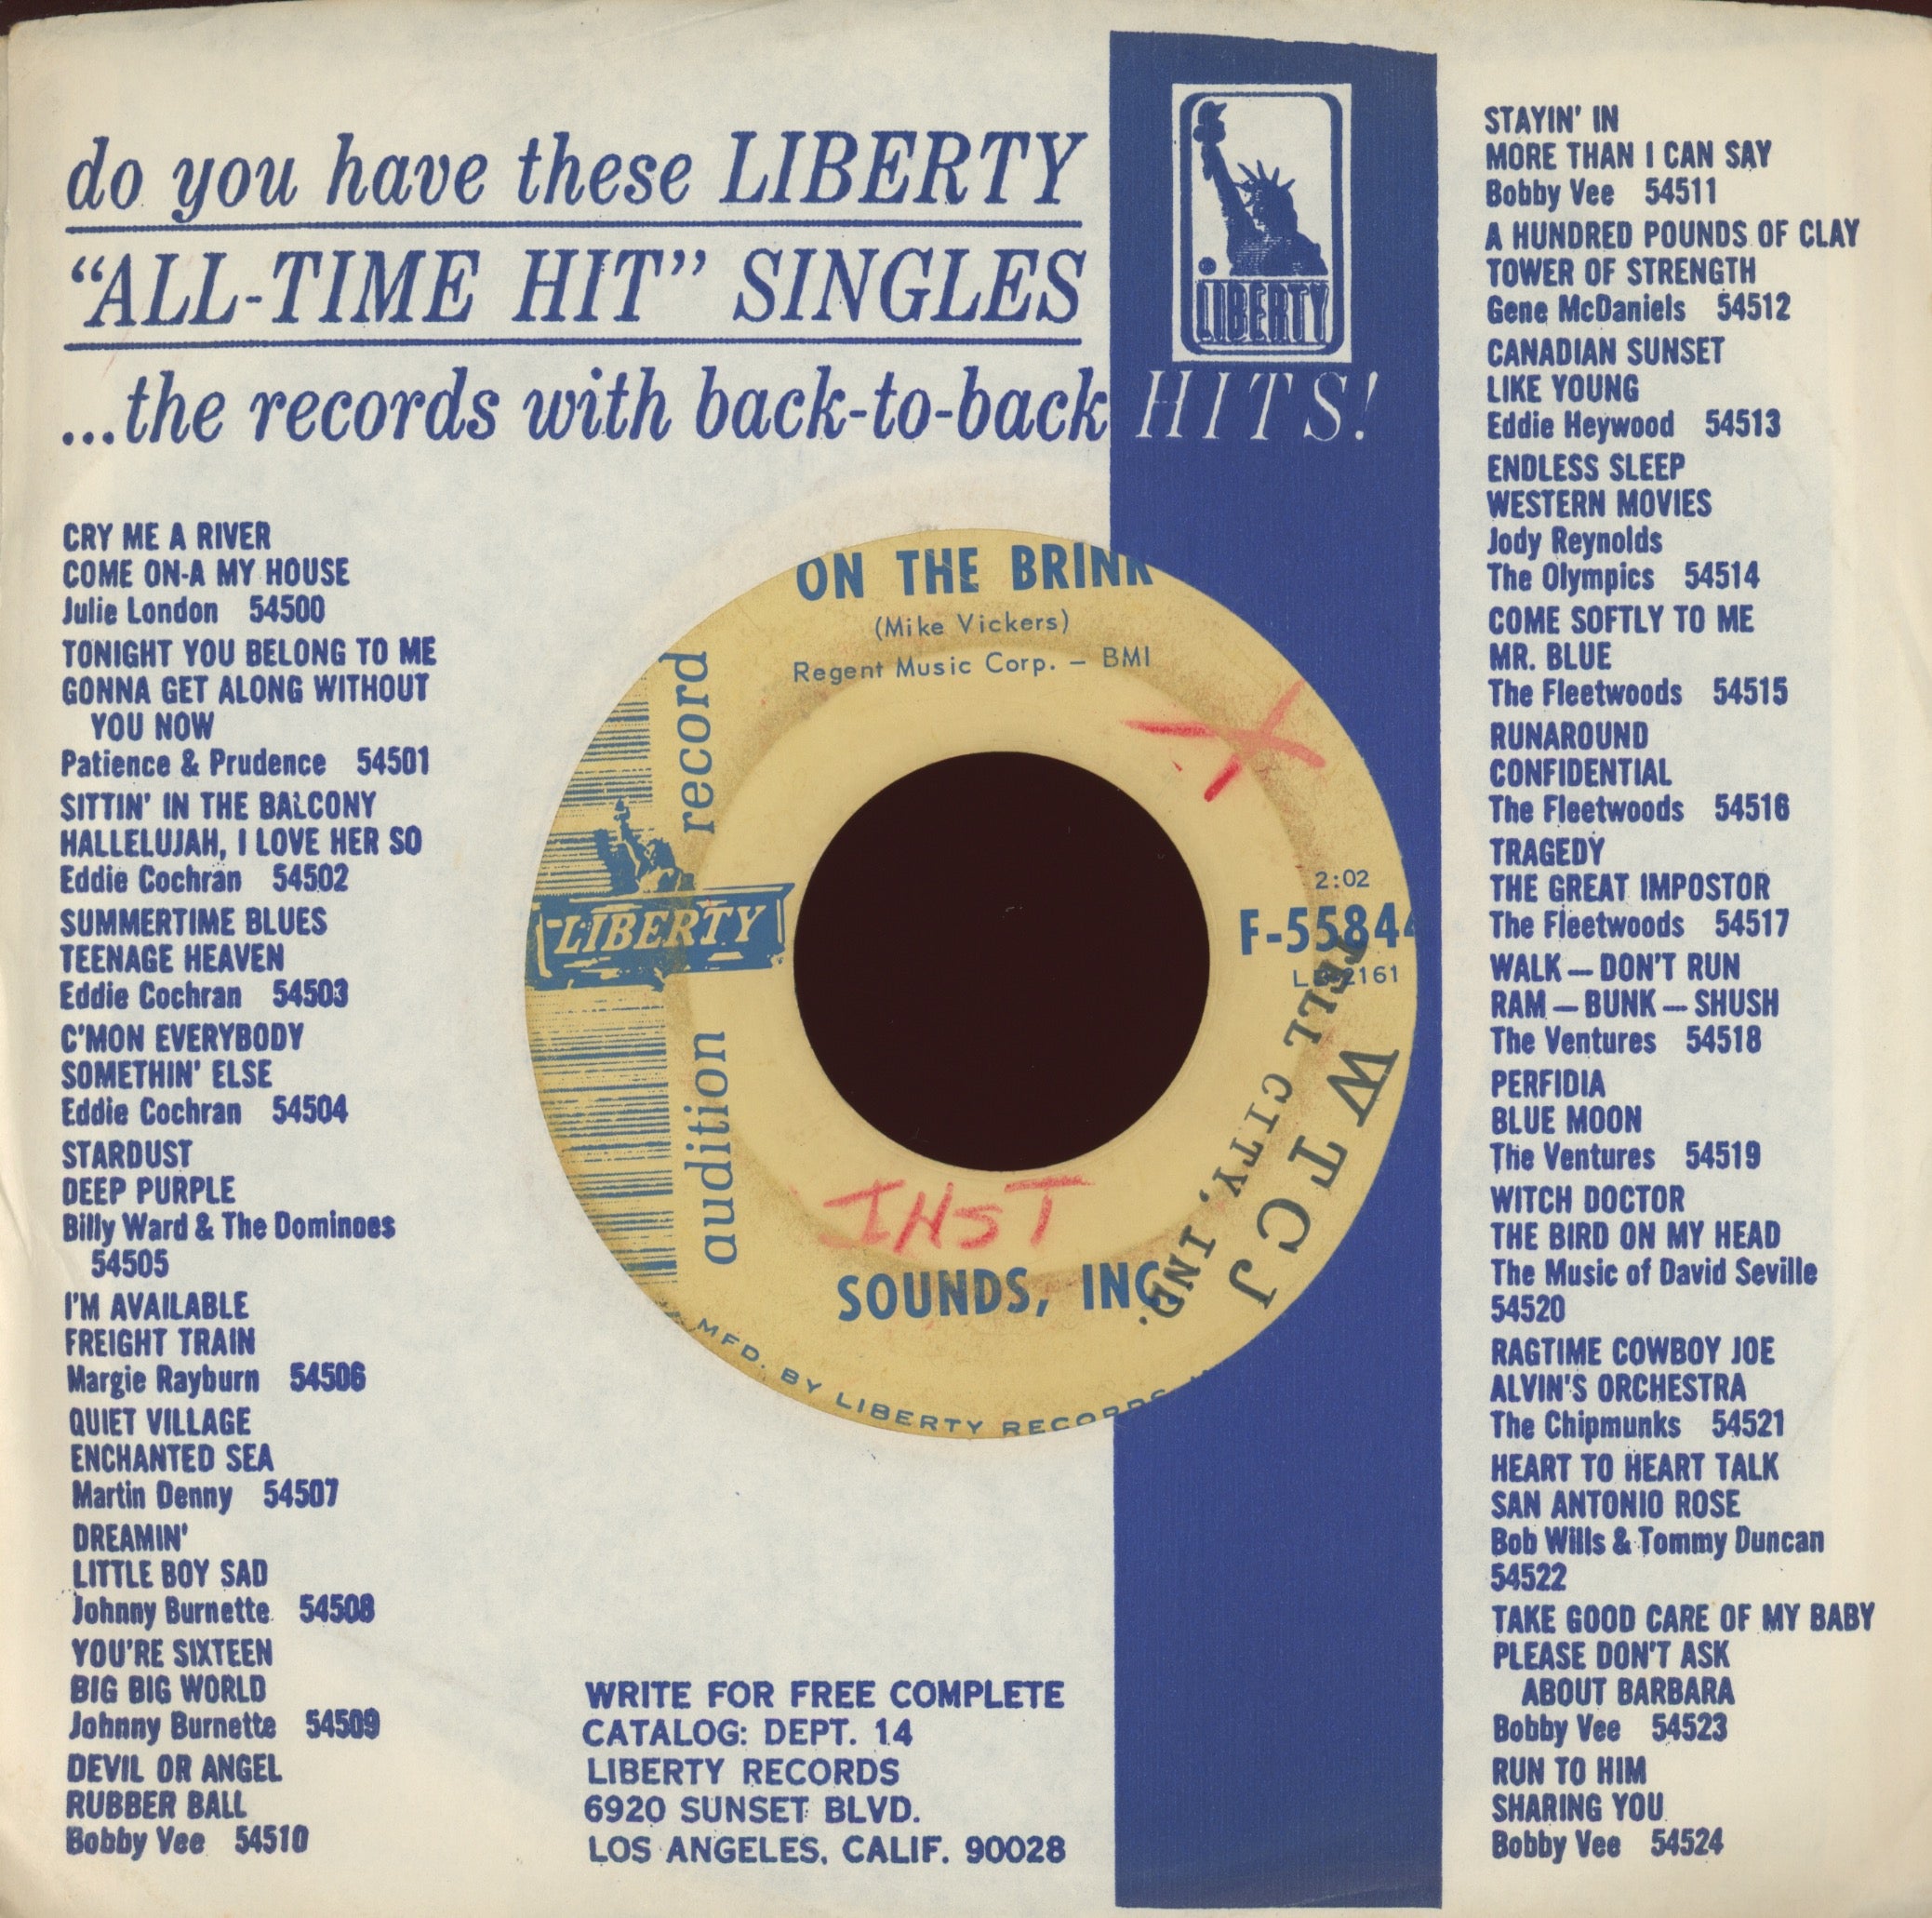 Sounds Incorporated - I Am Comin' Through on Liberty Promo Mod Soul 45